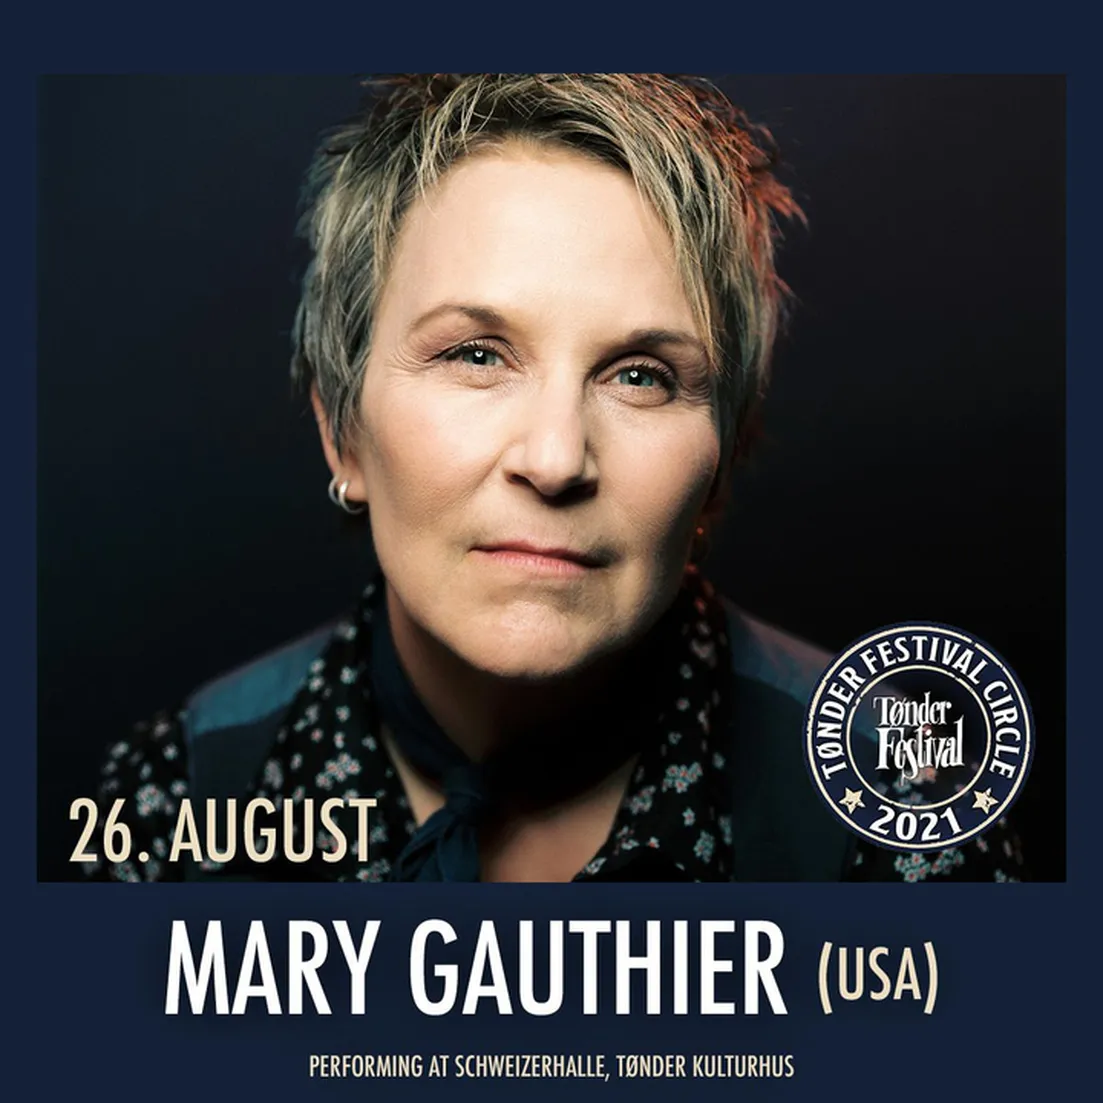 Bandsintown | Mary Gauthier Tickets Tønder Festival, Aug 26,